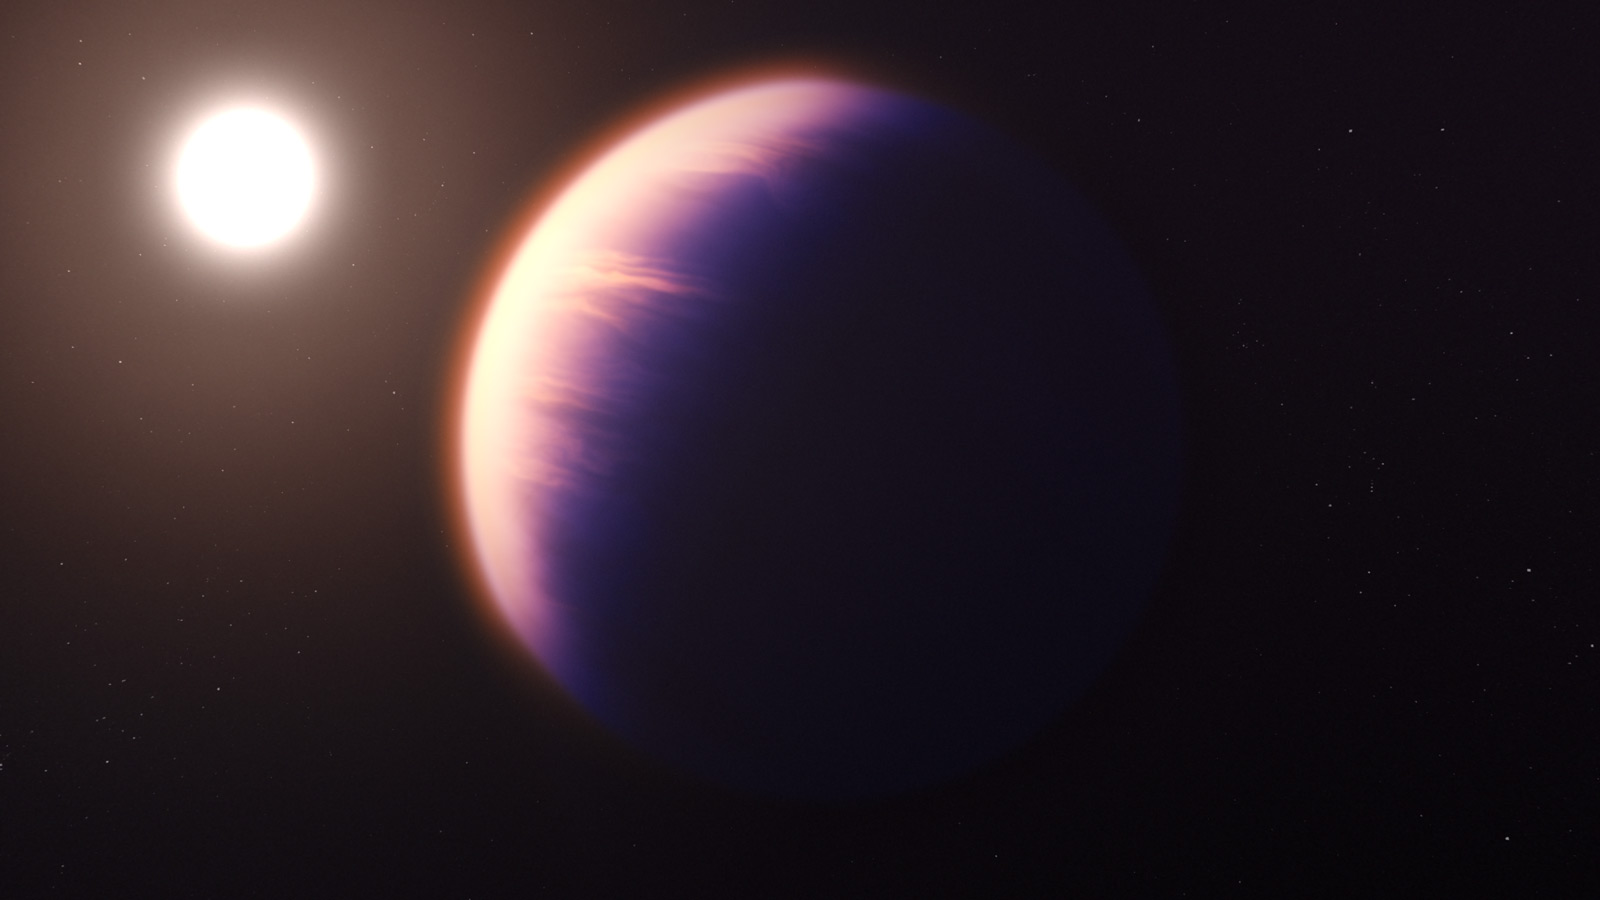 slide 3 - An artist's rendering of a large gas giant exoplanet orbiting a yellow star in the distance.